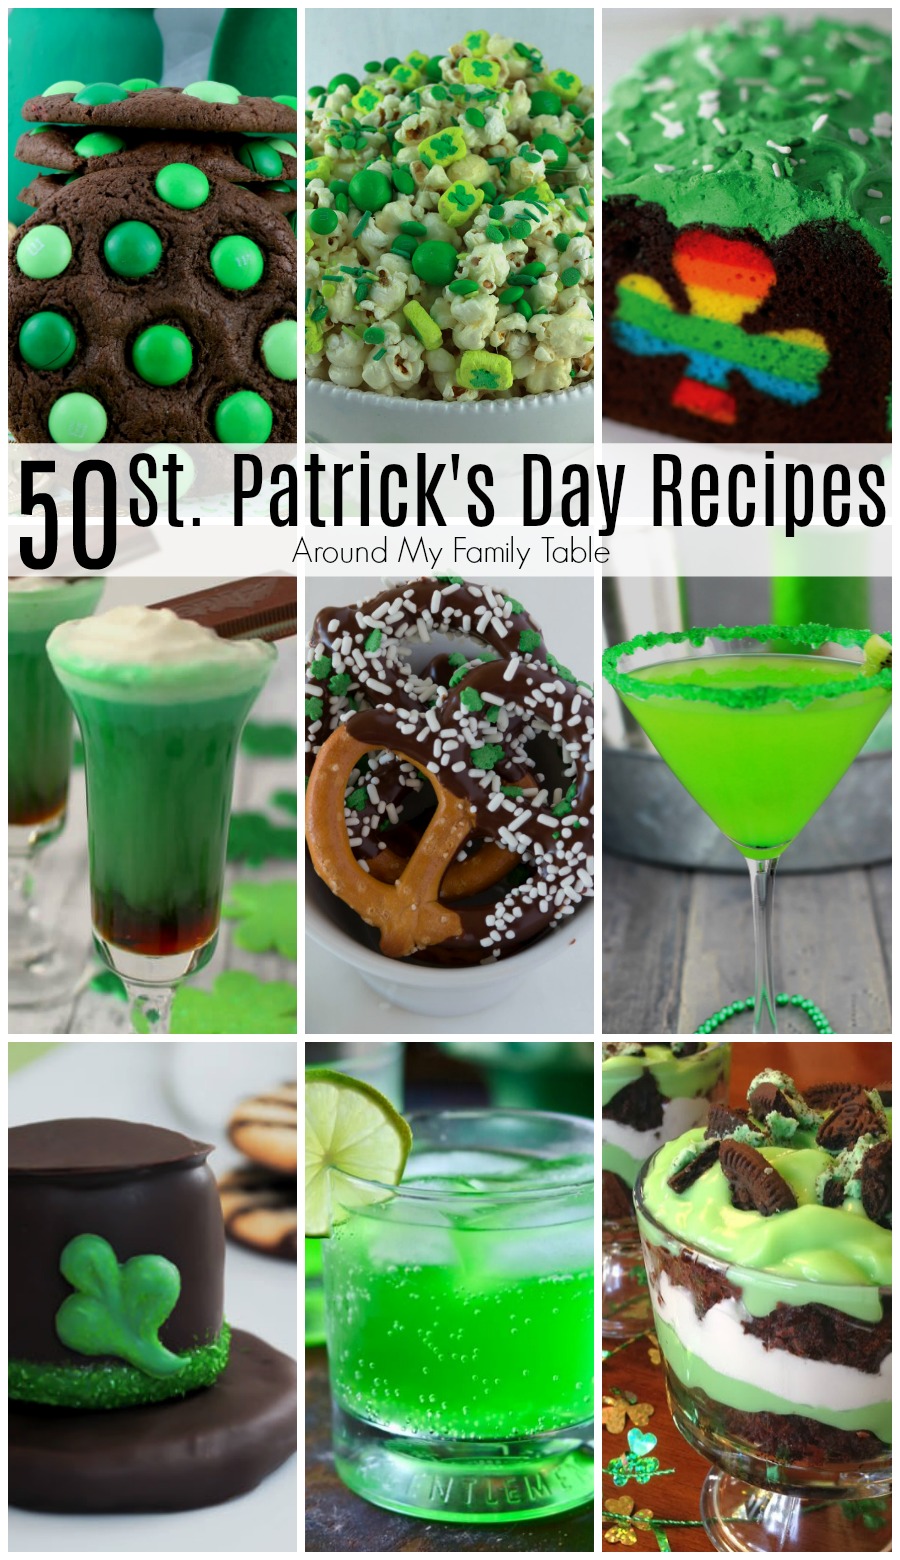 This collection of St. Patrick’s Day Recipes has 50 recipes to get you in the lucky Irish spirit! From appetizers to desserts...you'll find everything you need for a delicious and fun holiday!